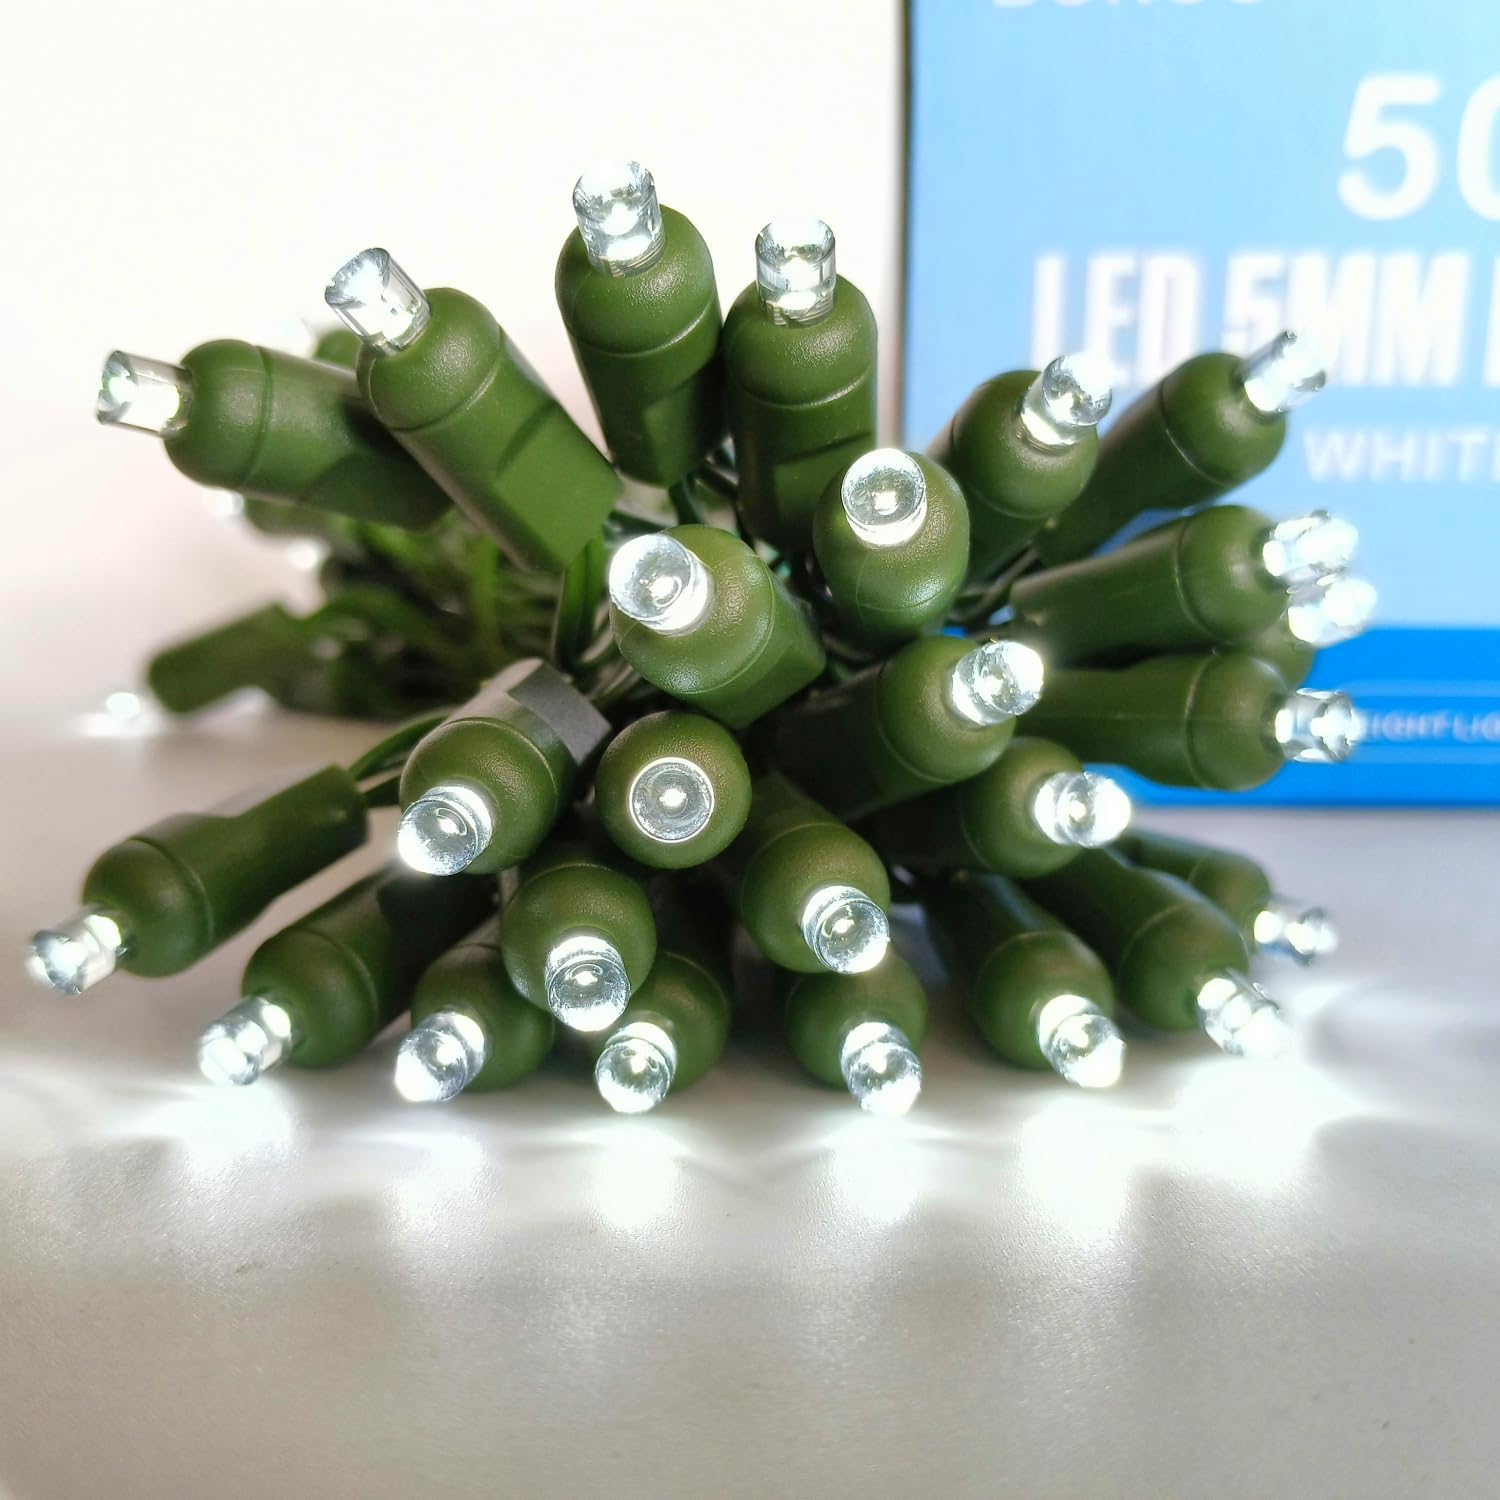 50 Bulbs White 5mm LED Christmas Lights Battery Operated with Remote Timer 8 Lighting Modes, Green Wire